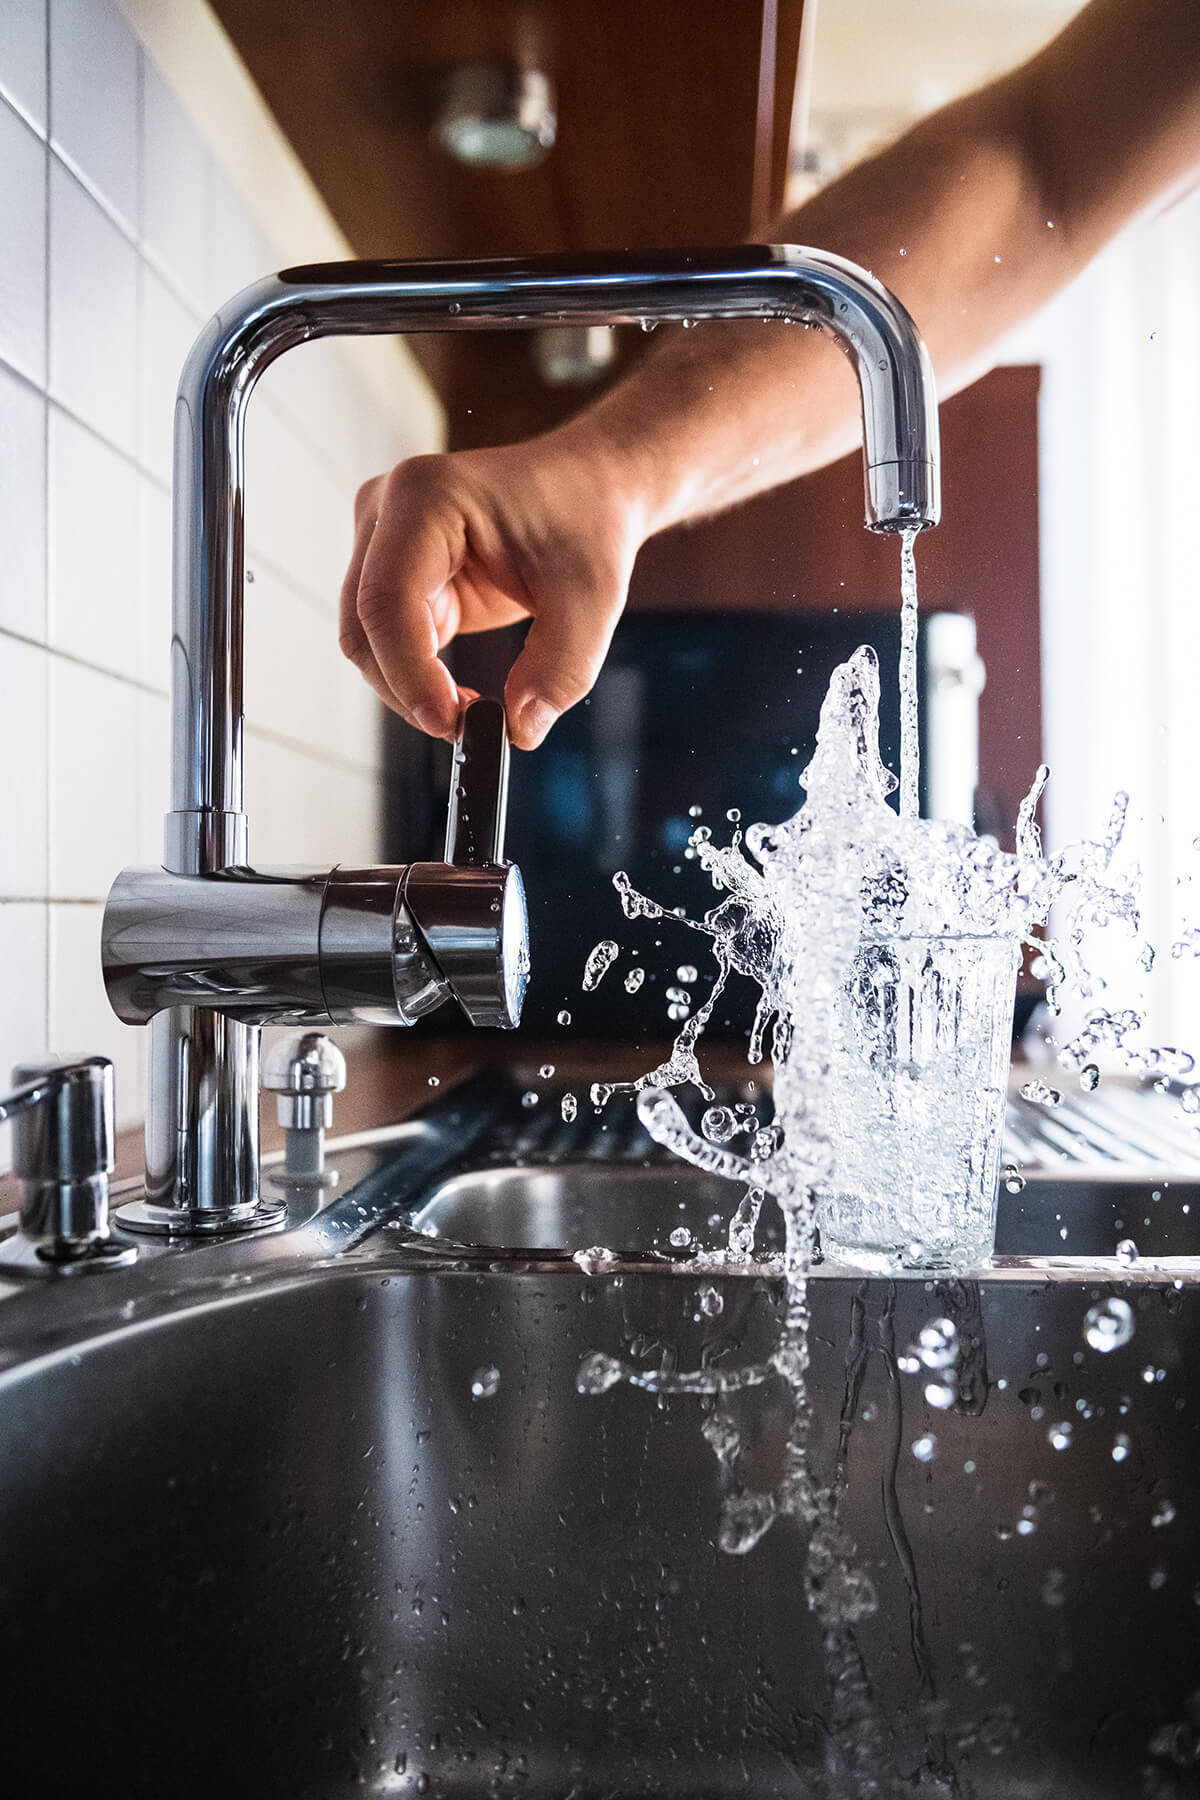 Choose the Plumber in Burnaby With Consistently Great Reviews